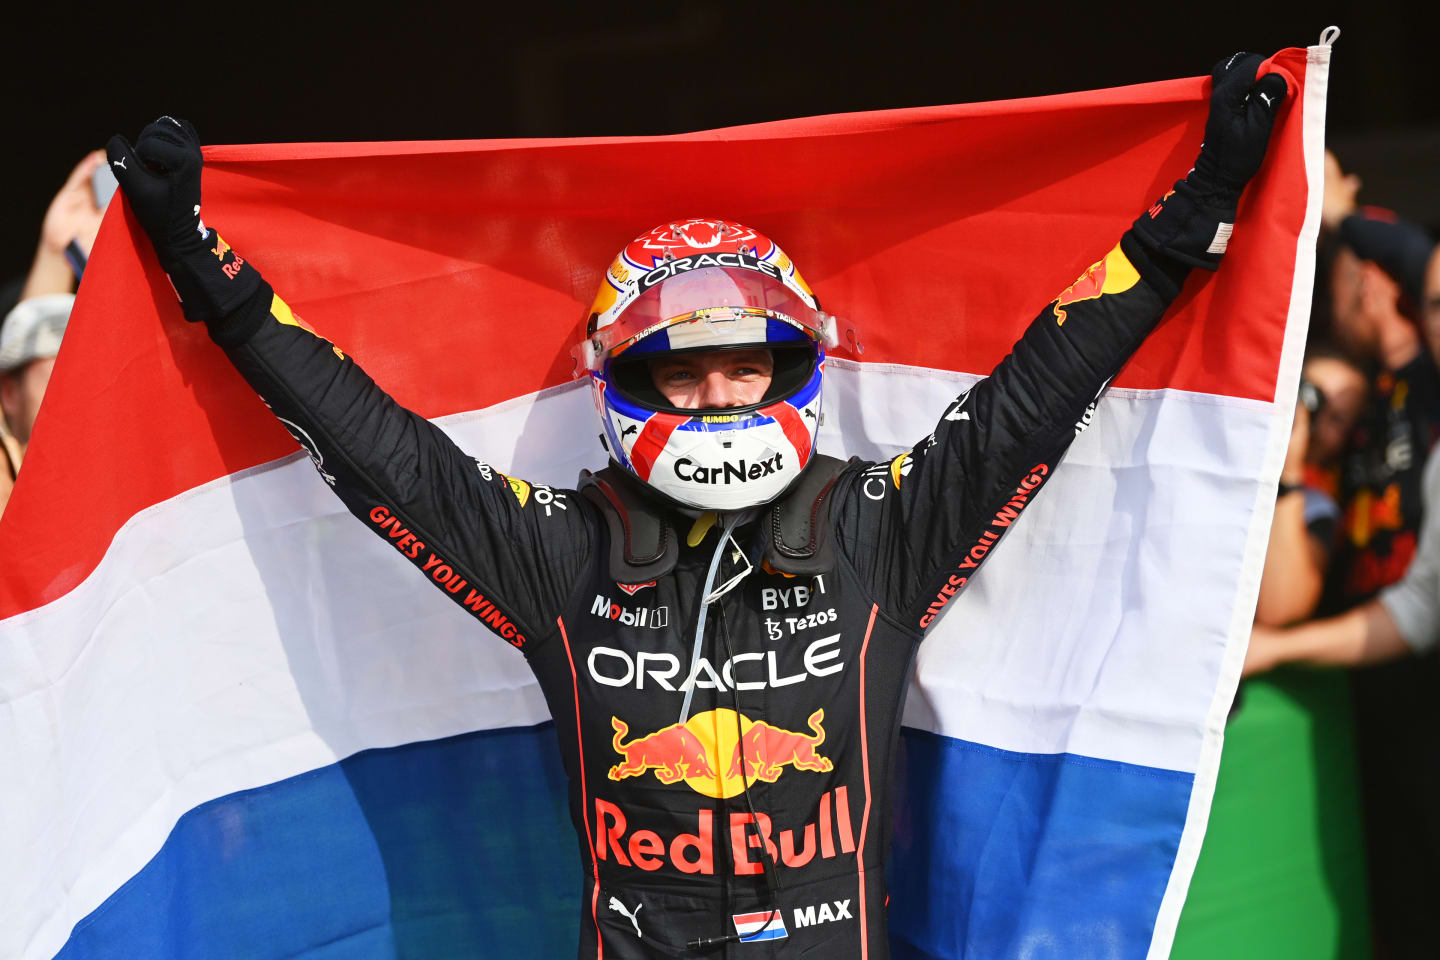 ZANDVOORT, NETHERLANDS - SEPTEMBER 04: Race winner Max Verstappen of the Netherlands and Oracle Red Bull Racing celebrates in parc ferme during the F1 Grand Prix of The Netherlands at Circuit Zandvoort on September 04, 2022 in Zandvoort, Netherlands. (Photo by Dan Mullan/Getty Images)